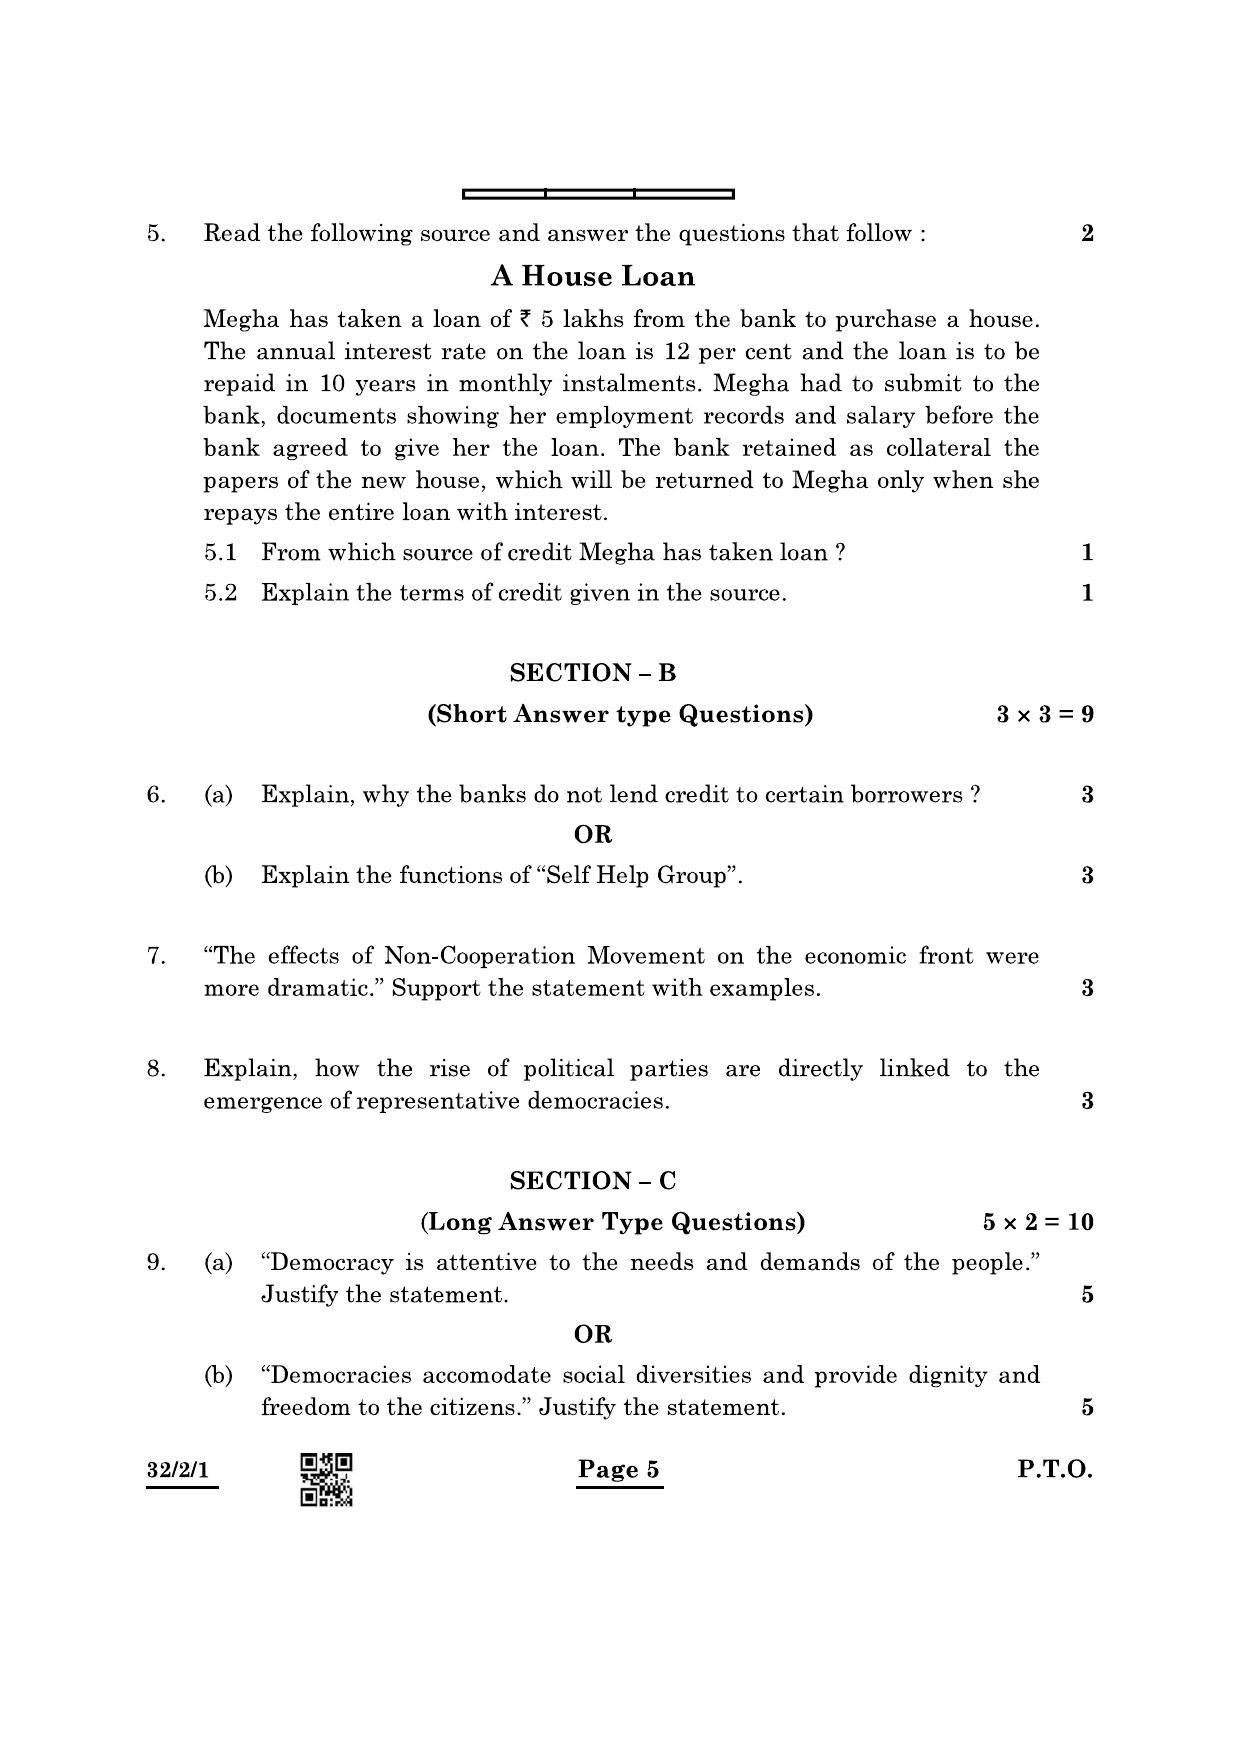 CBSE Class 10 32-2-1 Social Science 2022 Question Paper - Page 5